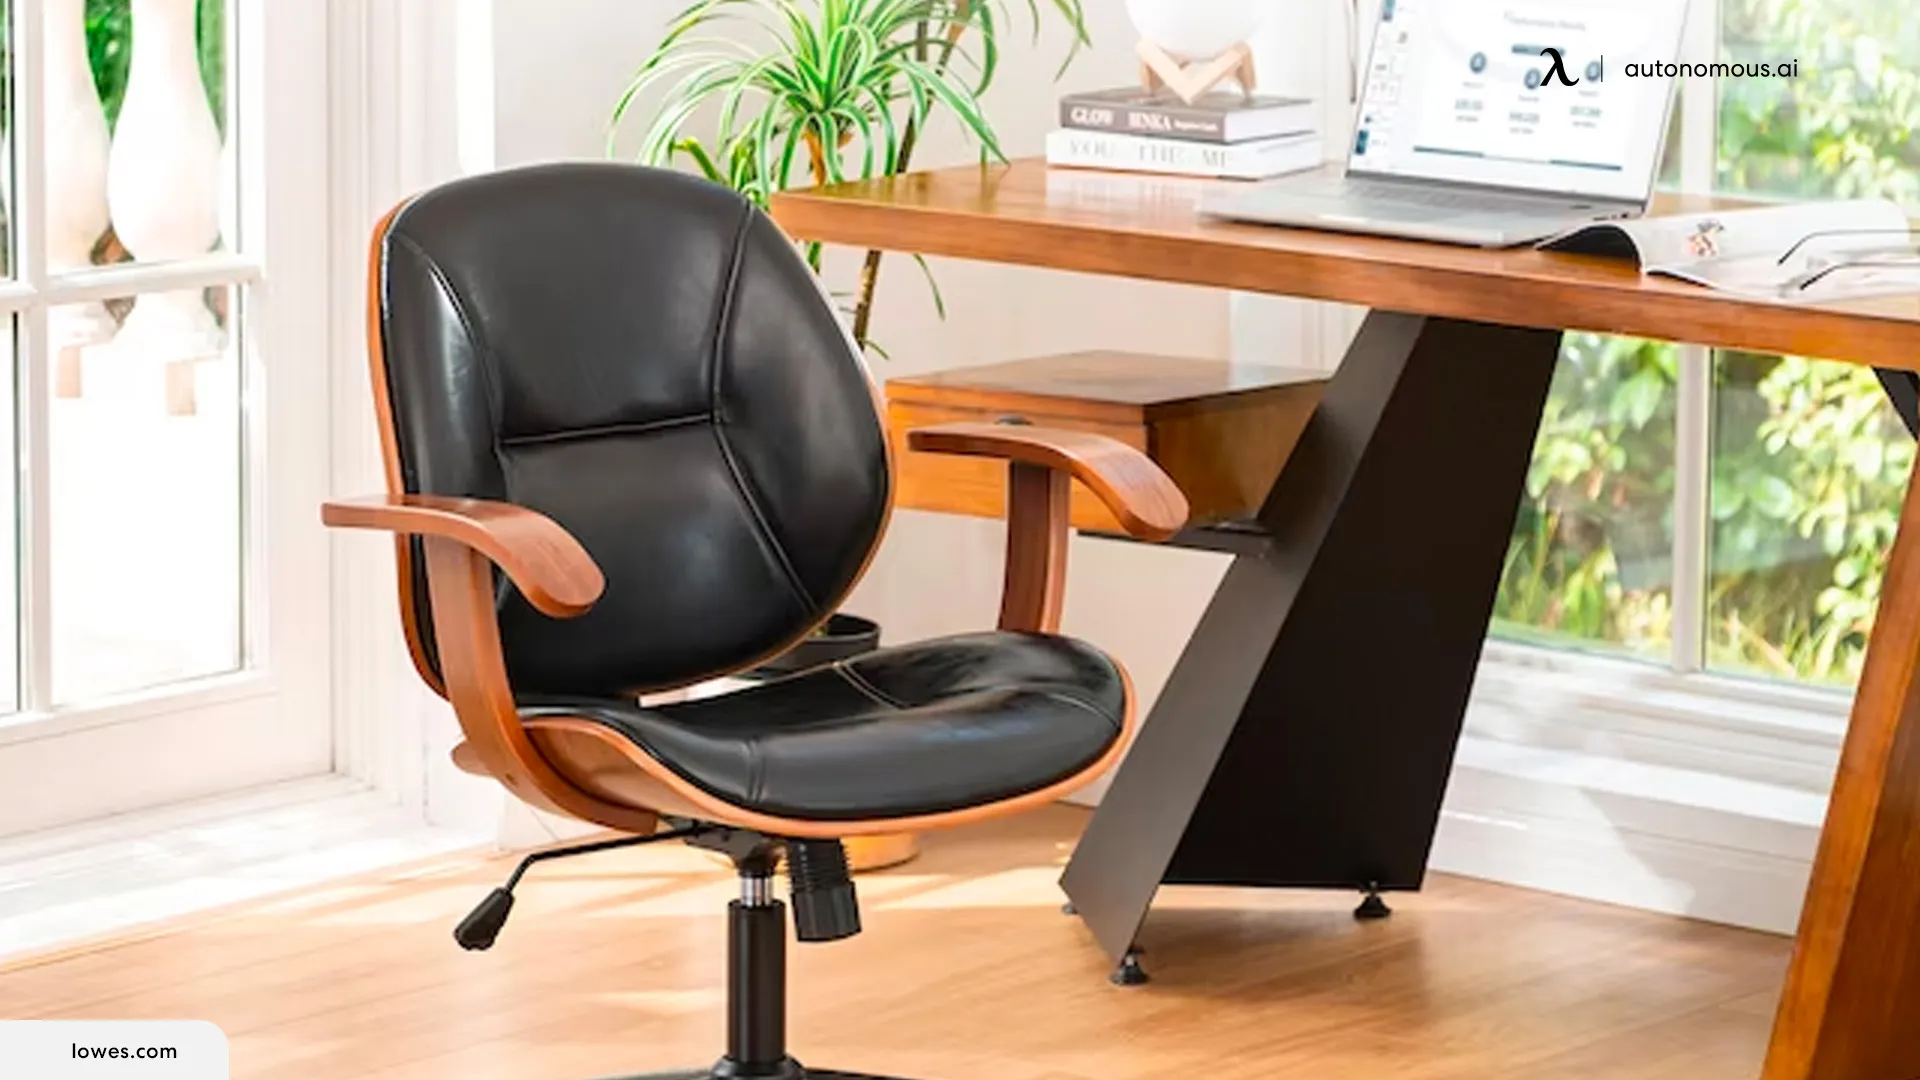 Brown Leather Office Chair with Other Office Furniture and Decor Elements